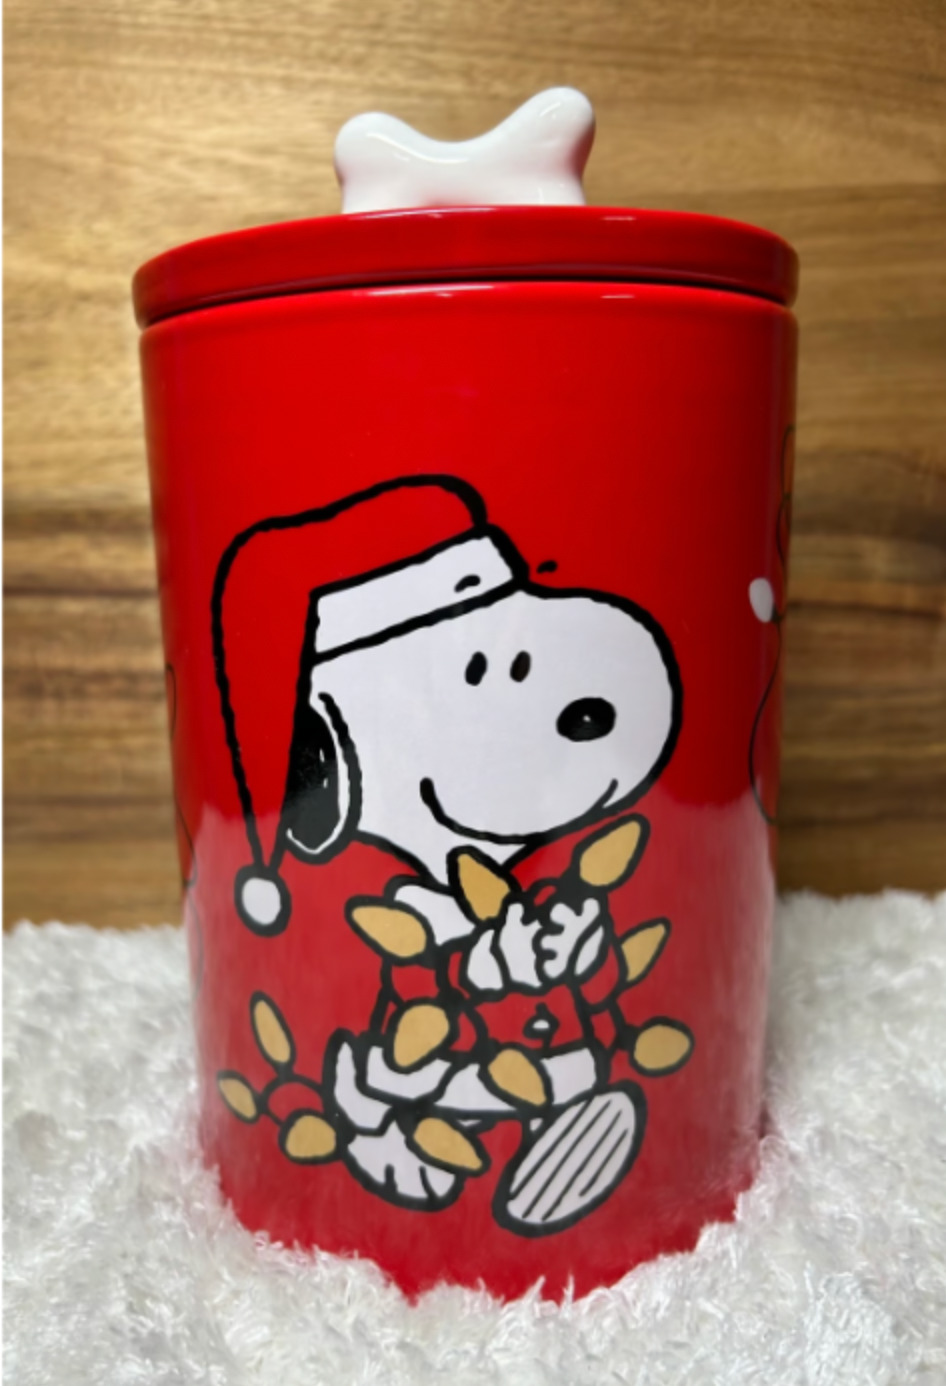 Peanuts Snoopy Happy Holidays Cookie Jar/Canister Red